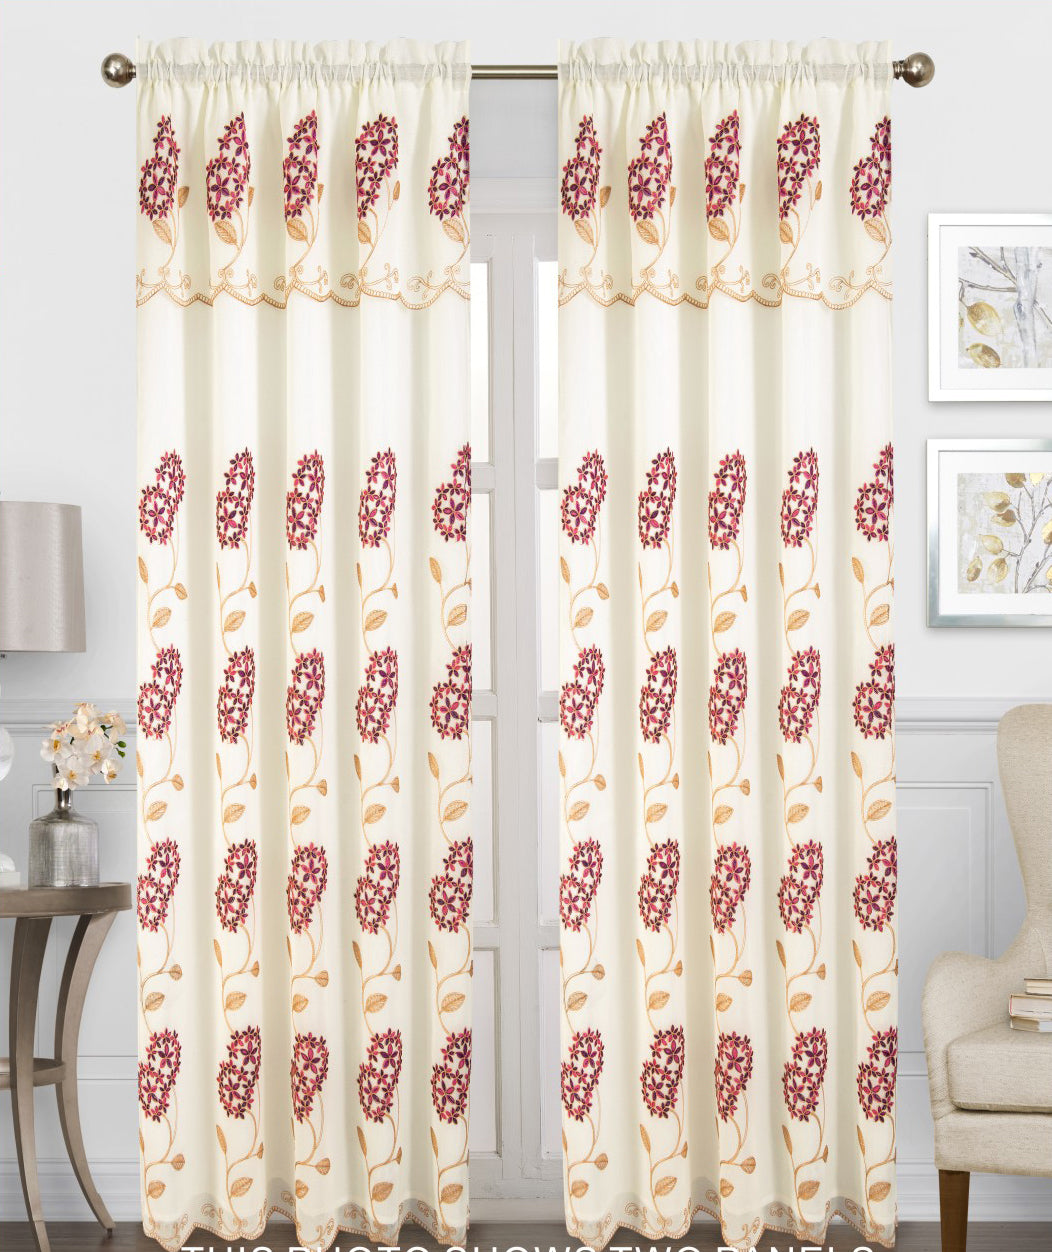 Gigi Voile Rainbow Embroidered Panel with Valance - Glory Home Design